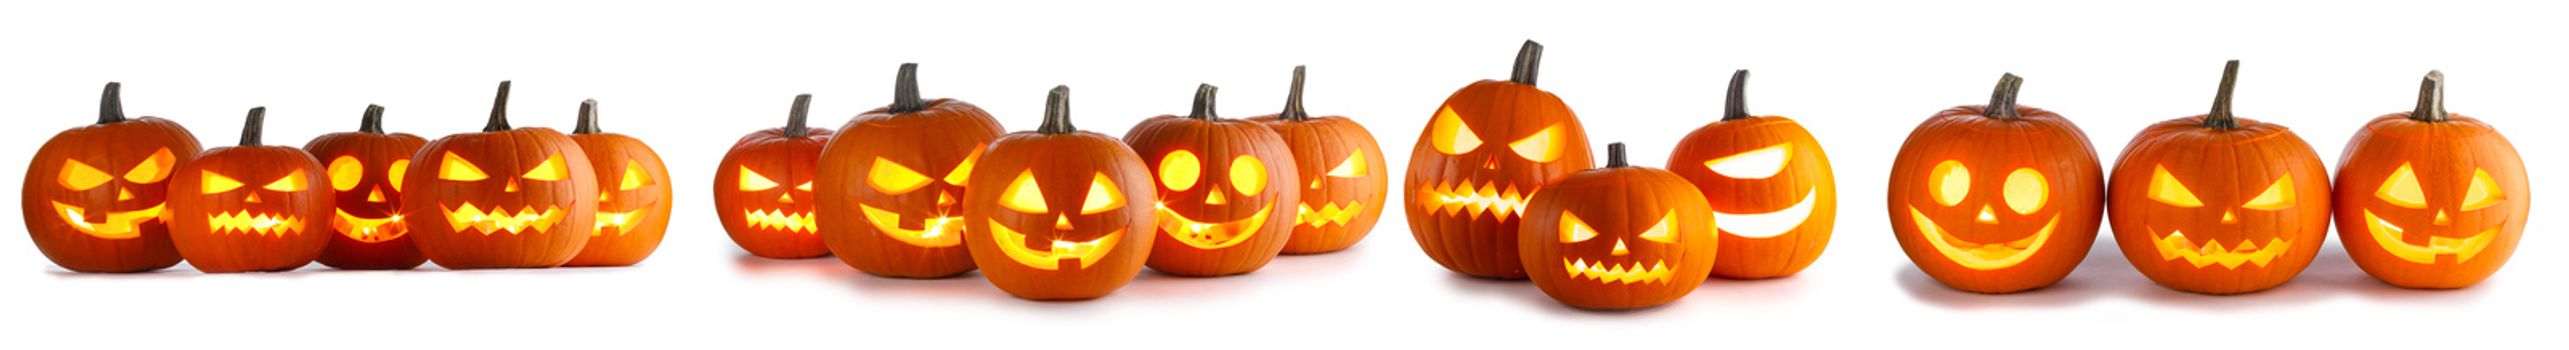 Set of Halloween Pumpkins isolated on white background